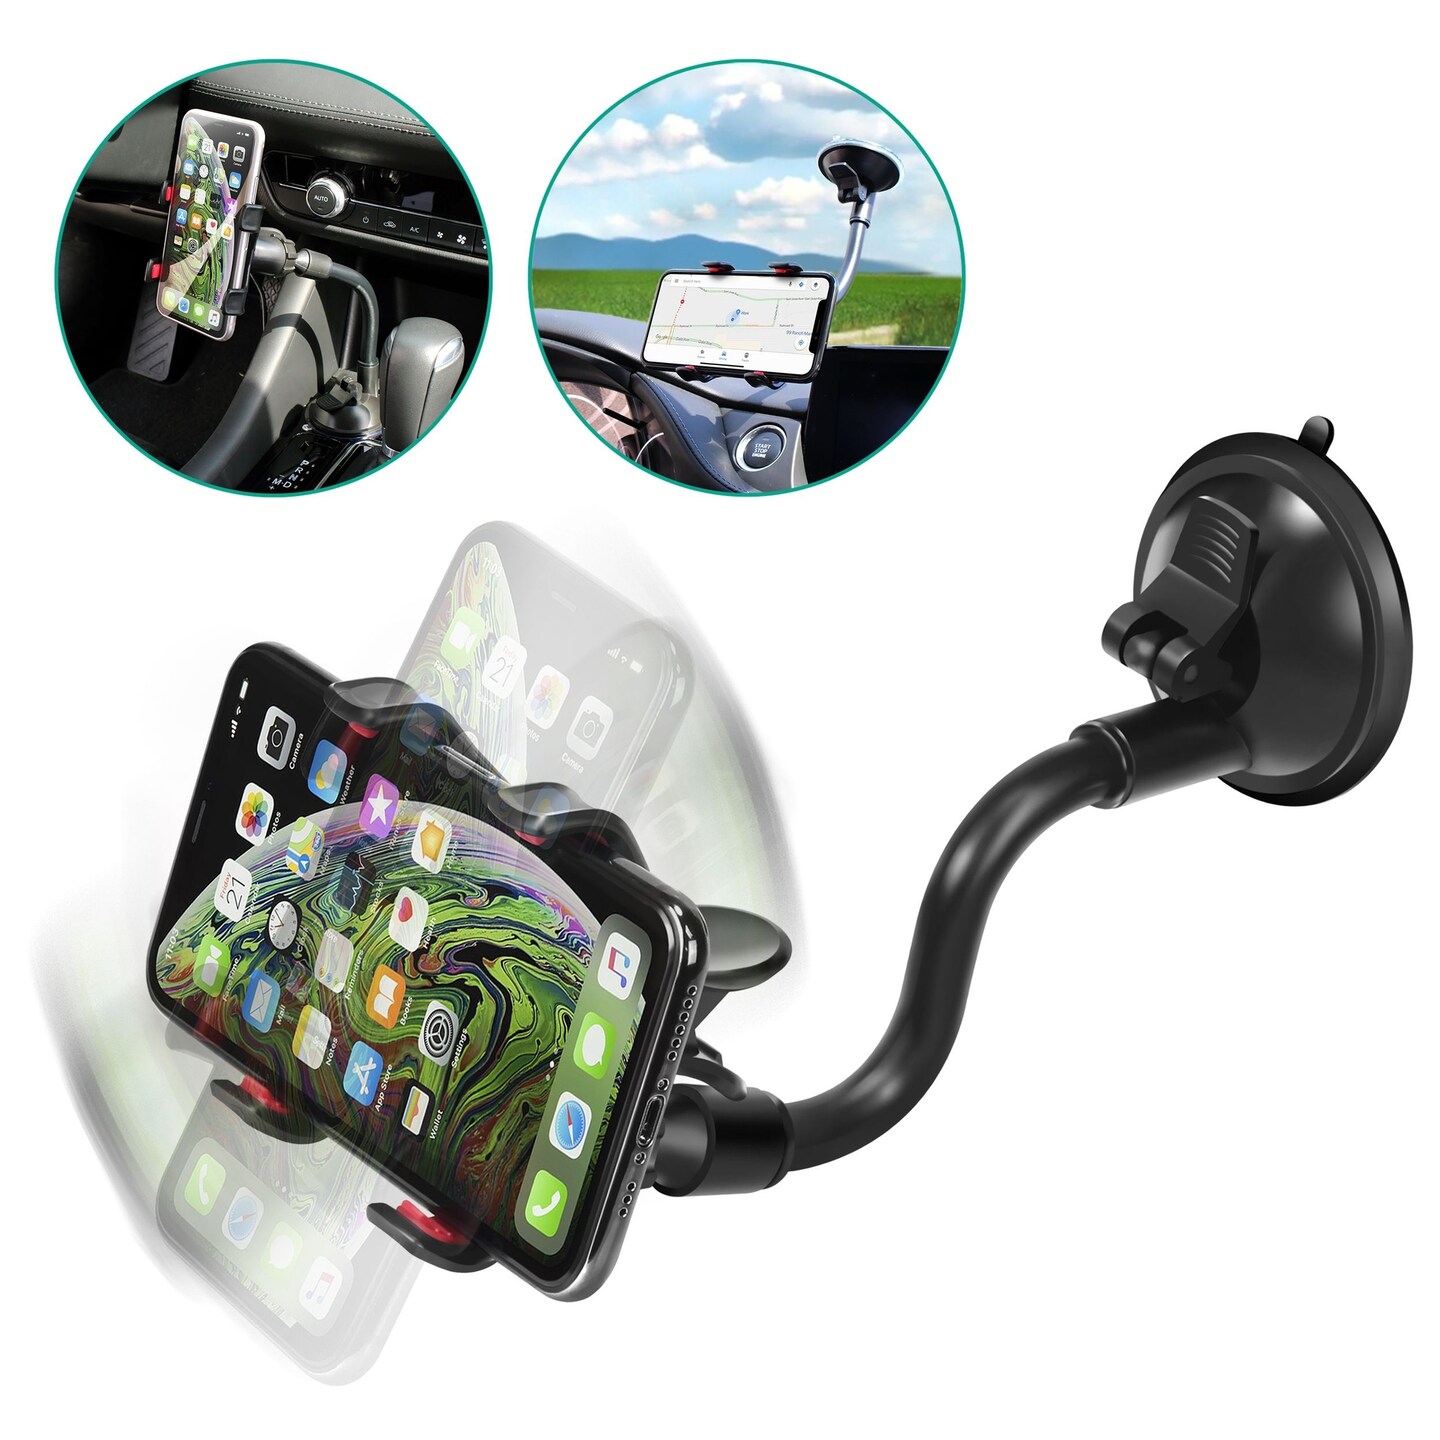 Insten Universal Windshield Gooseneck Car Mount Suction Cell Phone Holder  For Huawei LG Google Nexus 5X,LG G5; iPhone XS/ XS Max/ XR/8/ 8 Plus/X/ 7/7  Plus/6S, Samsung Galaxy S10/Note 9 /On5/S7/S9/S9+ Edge